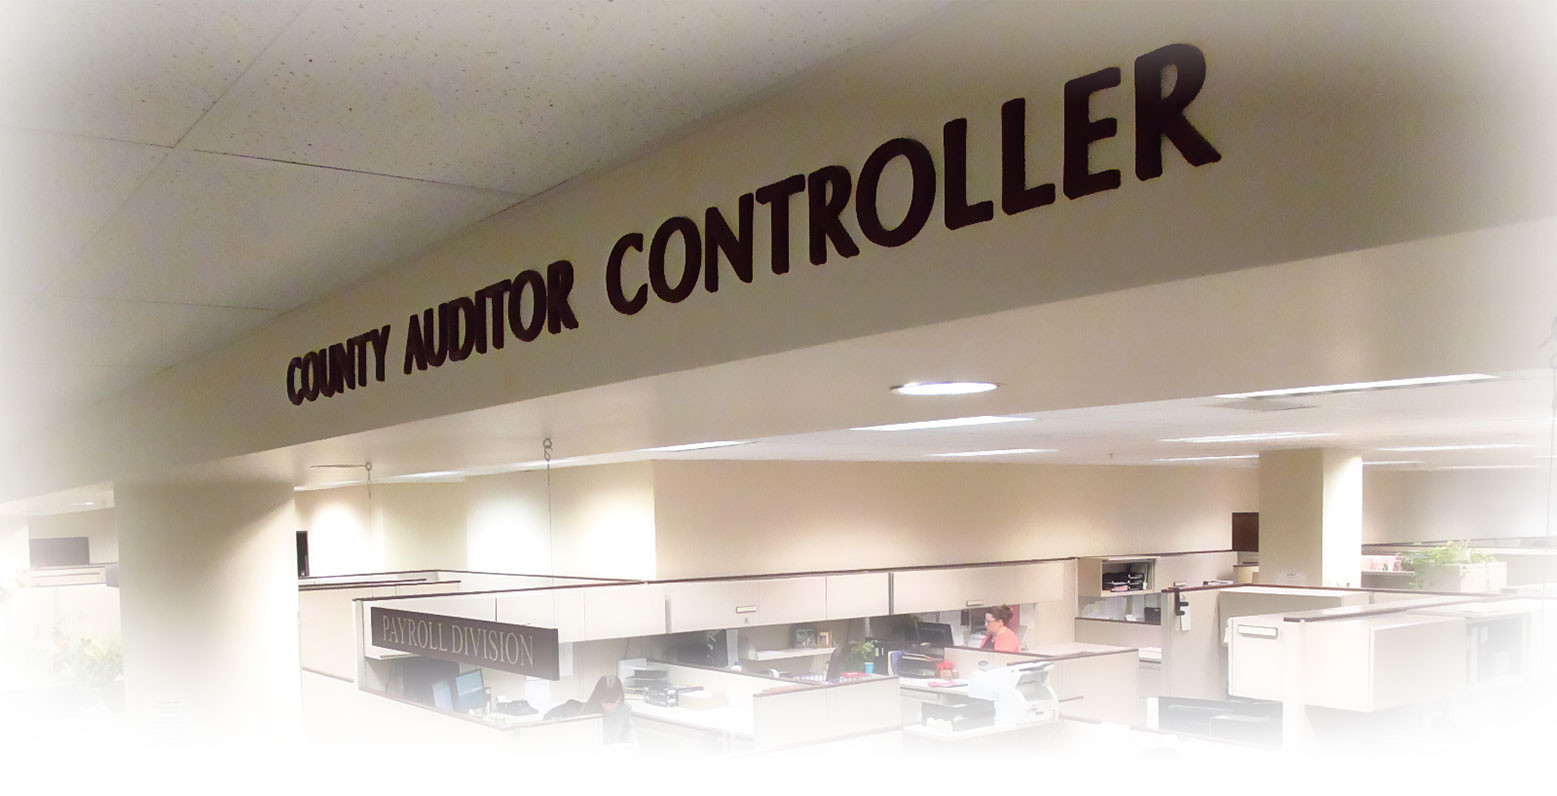 Welcome to Stanislaus County's Auditor-Controller's Office